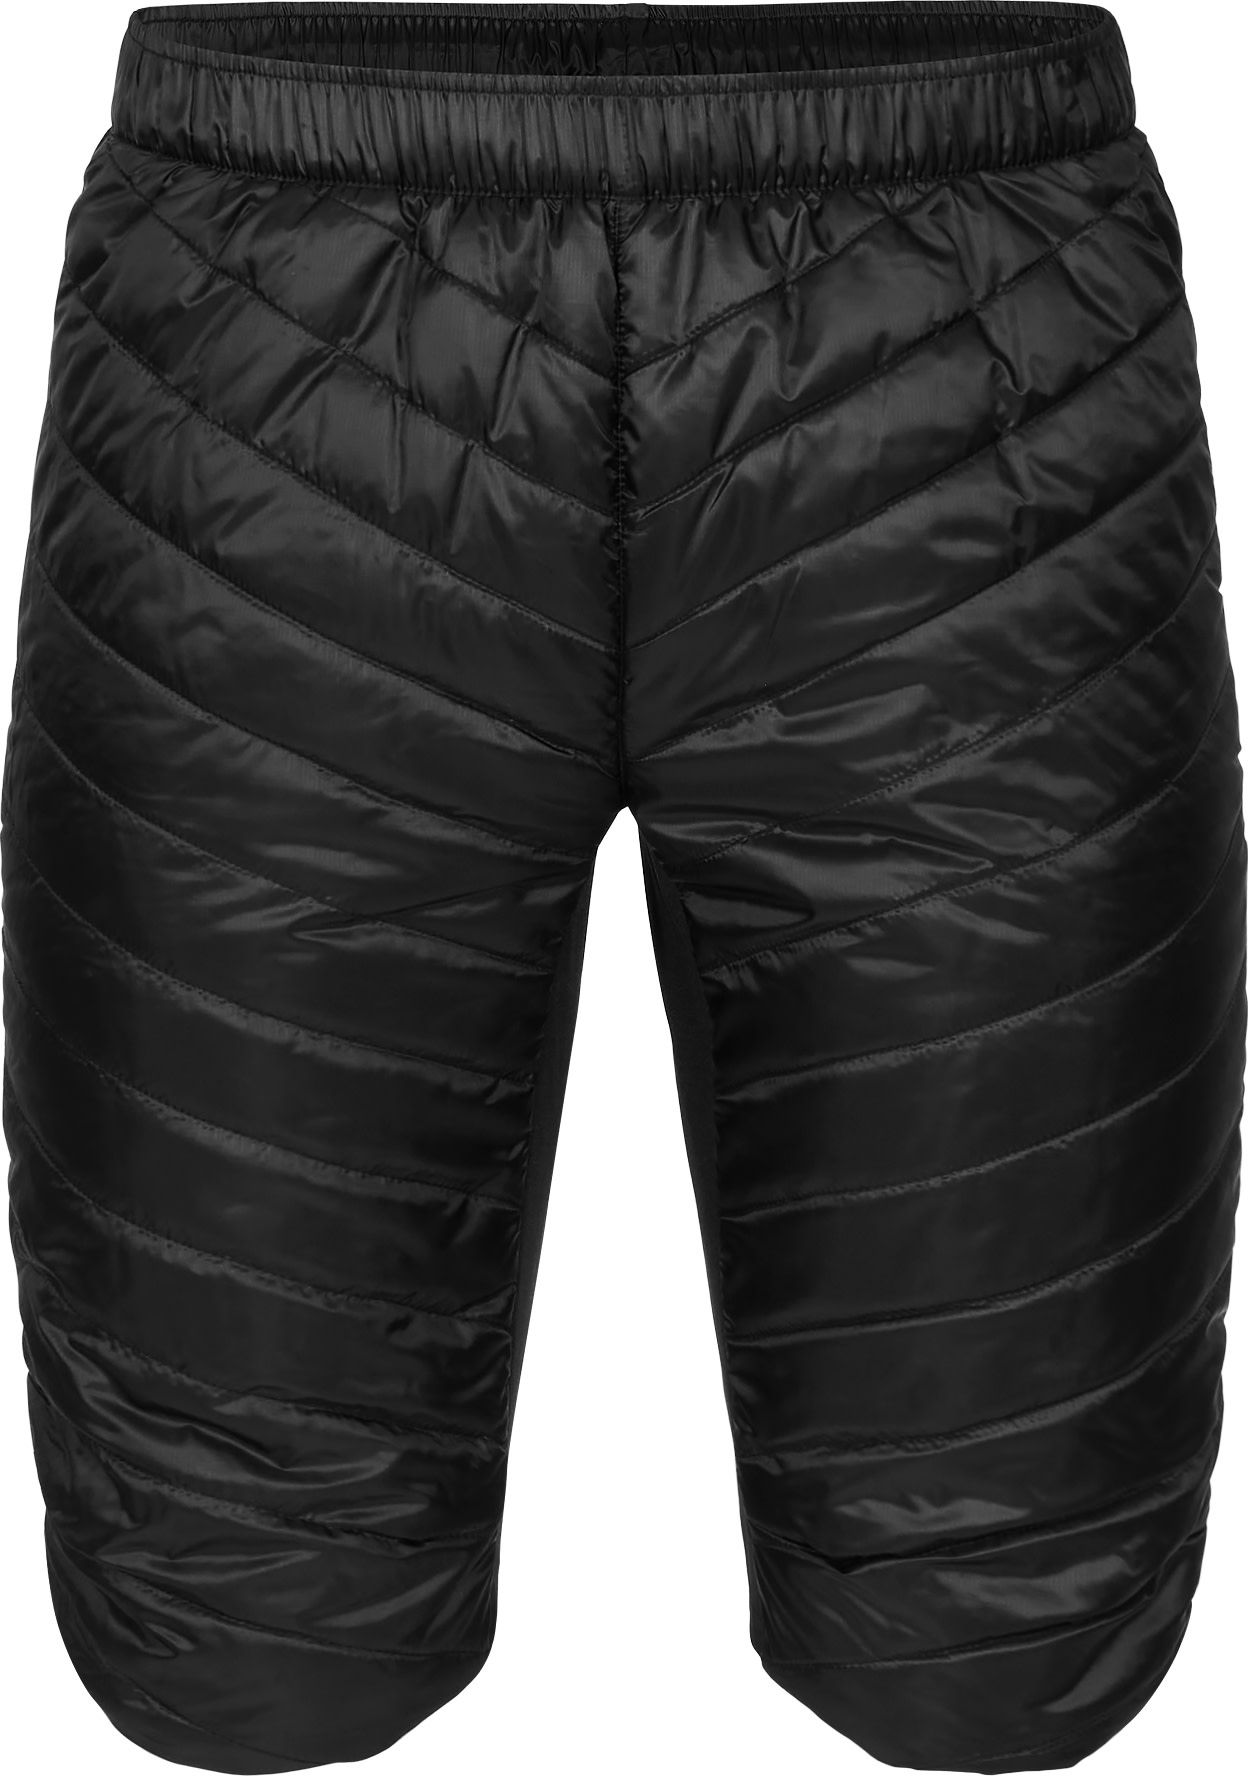 Men\'s Stretch Padded Buy Short | Outnorth Stretch | Padded here Over Men\'s Black beauty beauty Short Black Over